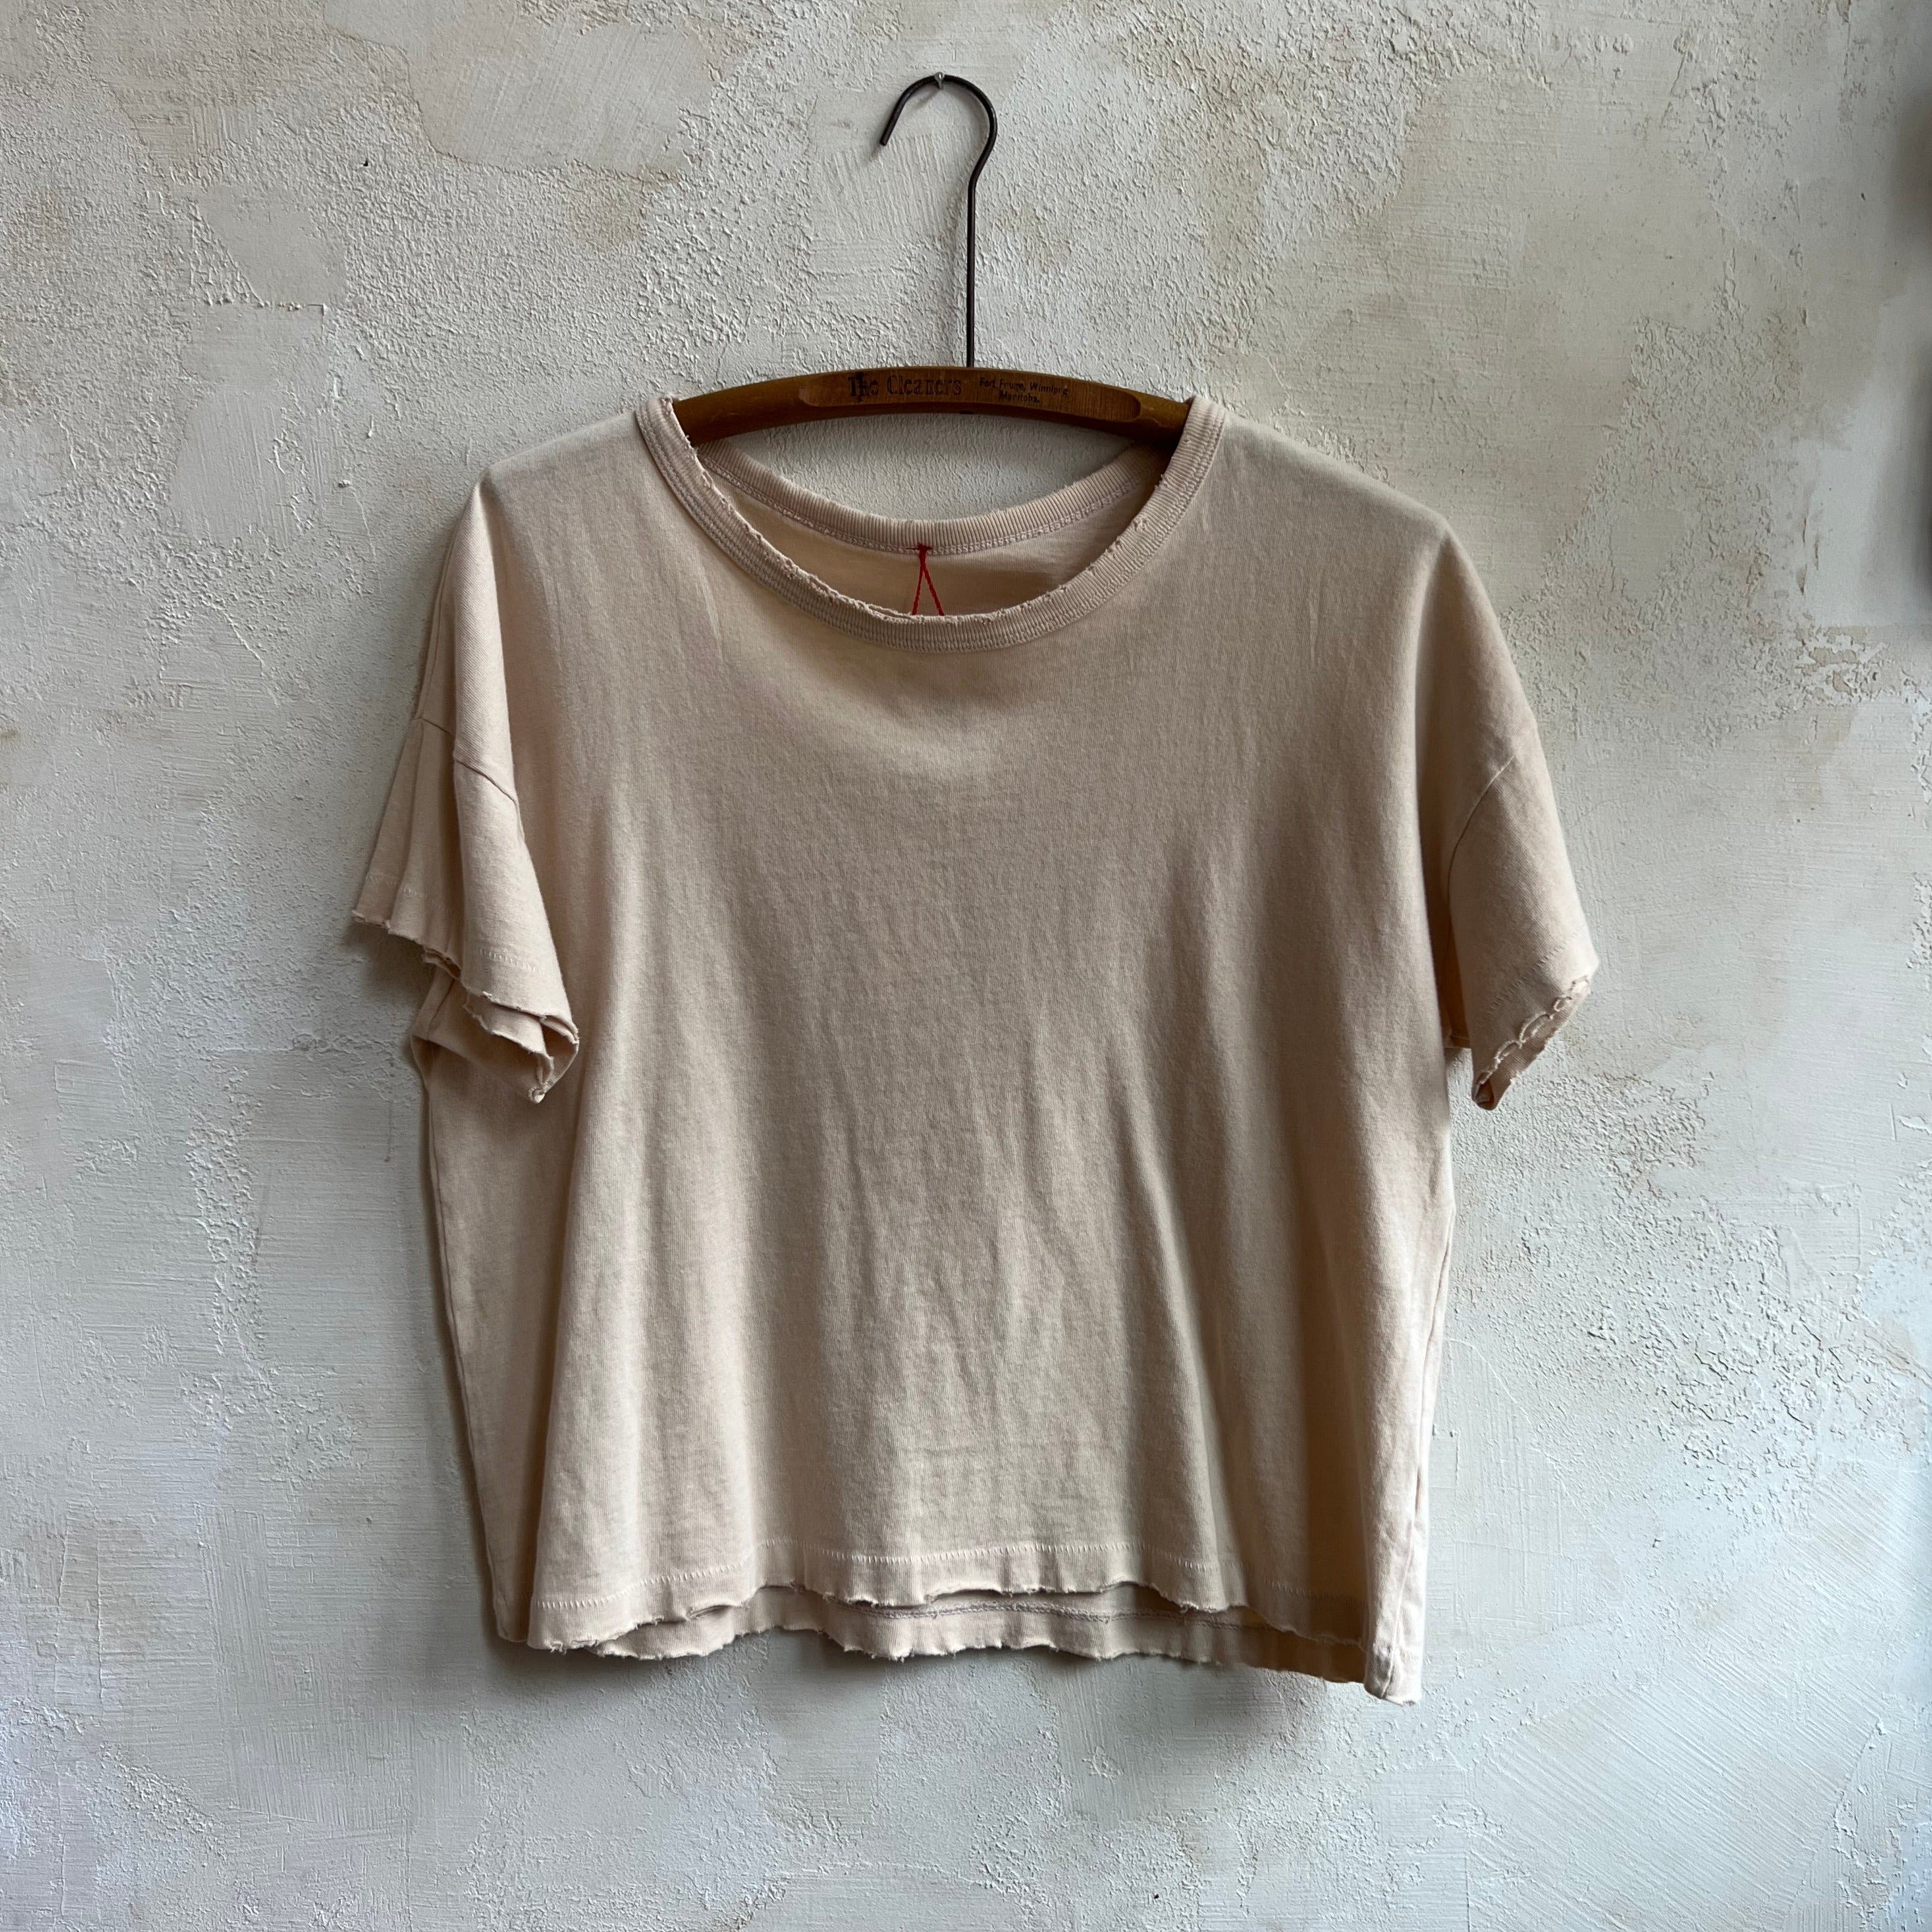 The Vintage Fille Tee in Horchata by Le Bon Shoppe